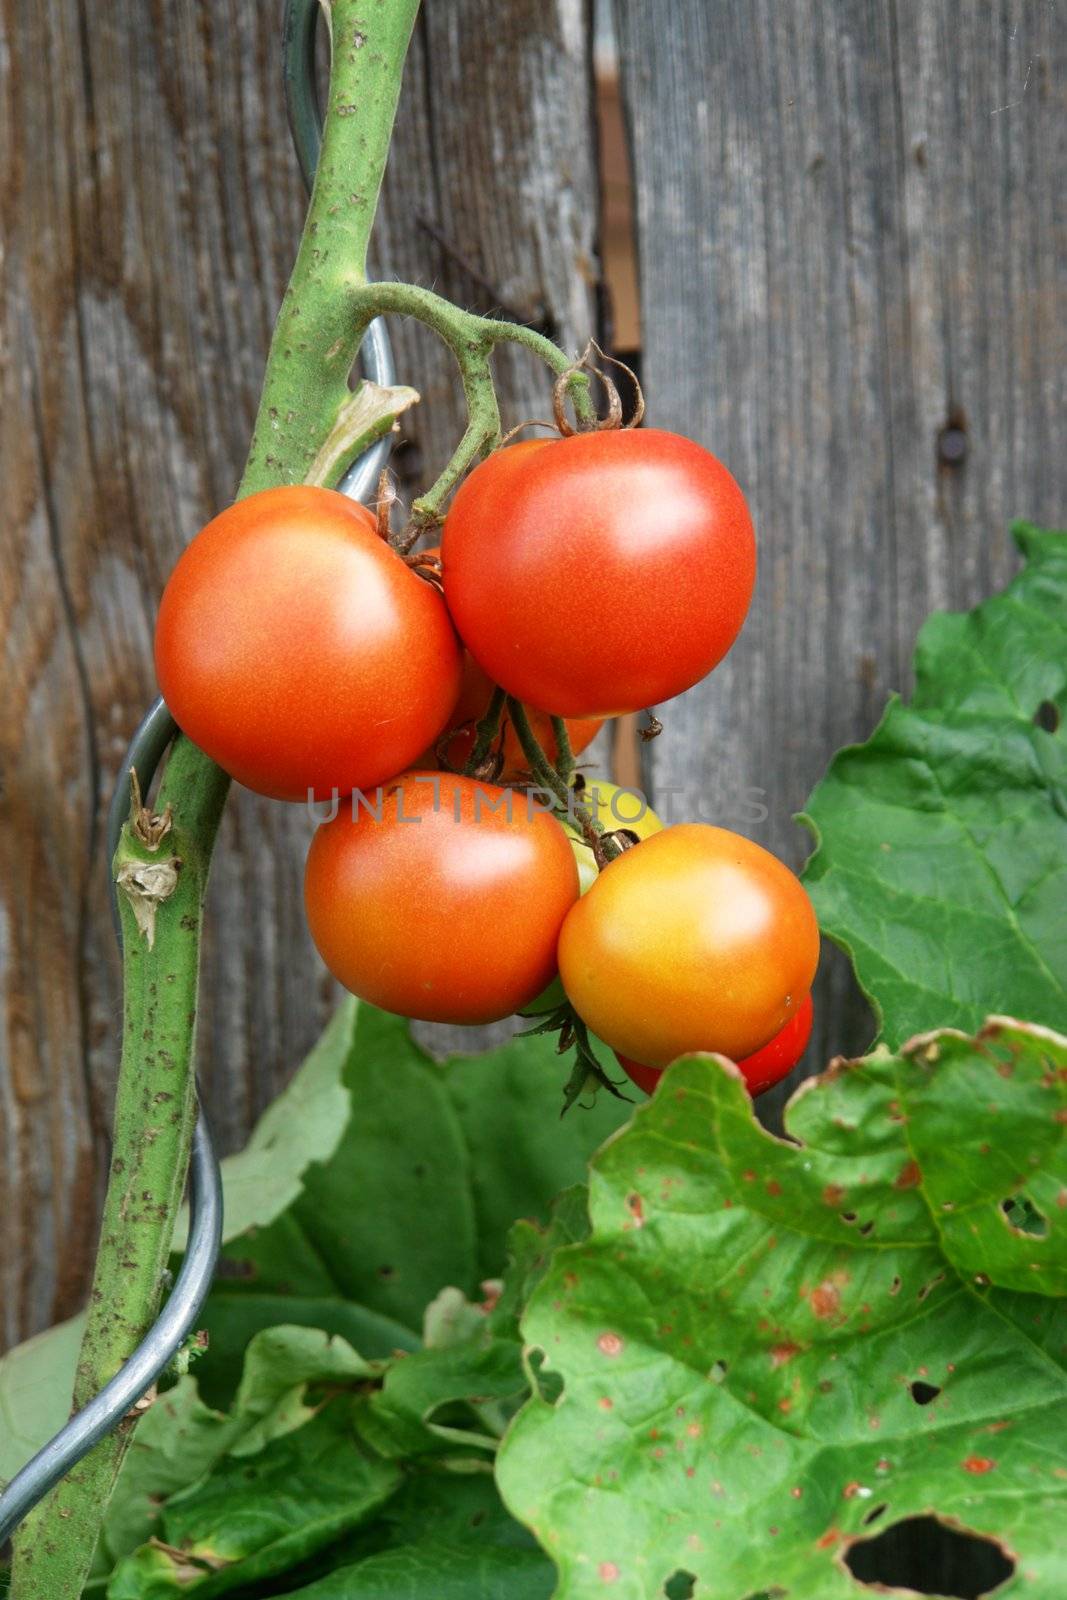 tomatoes ripening on the vine outdoors in Bavaria